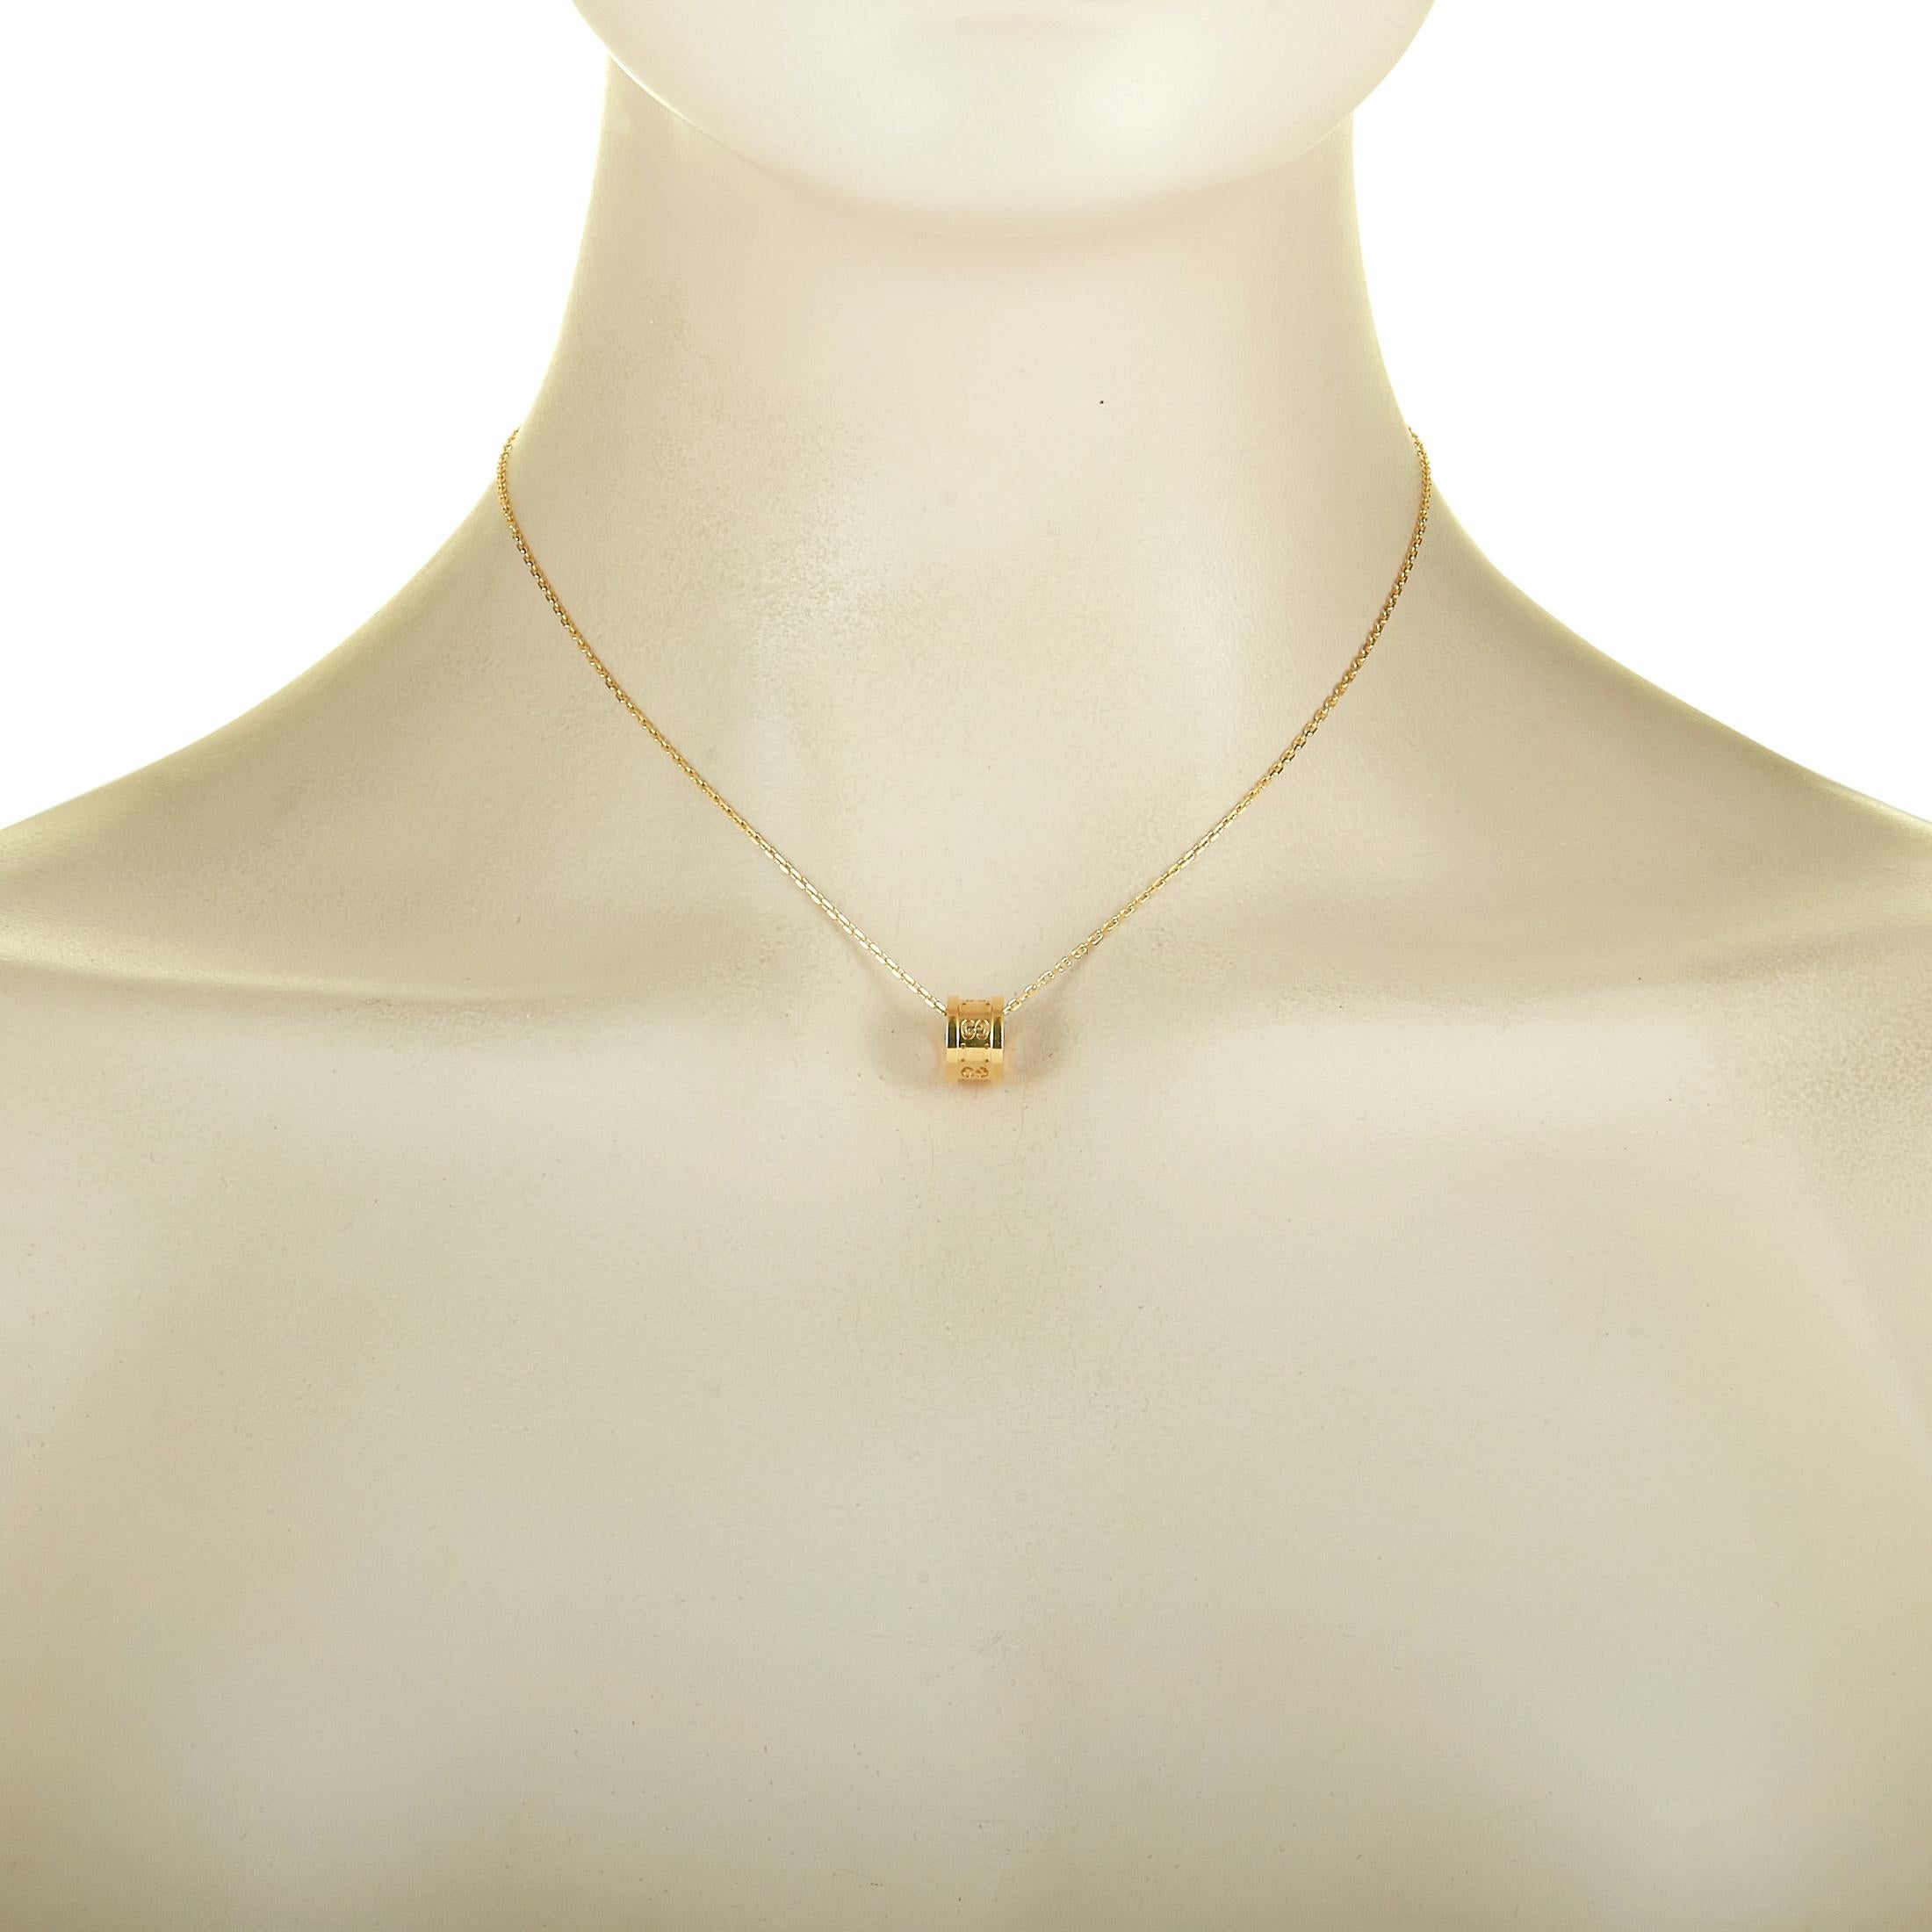 The Gucci “Icon Twirl” necklace is crafted from 18K yellow gold and weighs 5 grams. The necklace boasts a 16” chain and a pendant that measures 0.37” in length and 0.37” in width.
 
 This jewelry piece is offered in brand new condition and includes